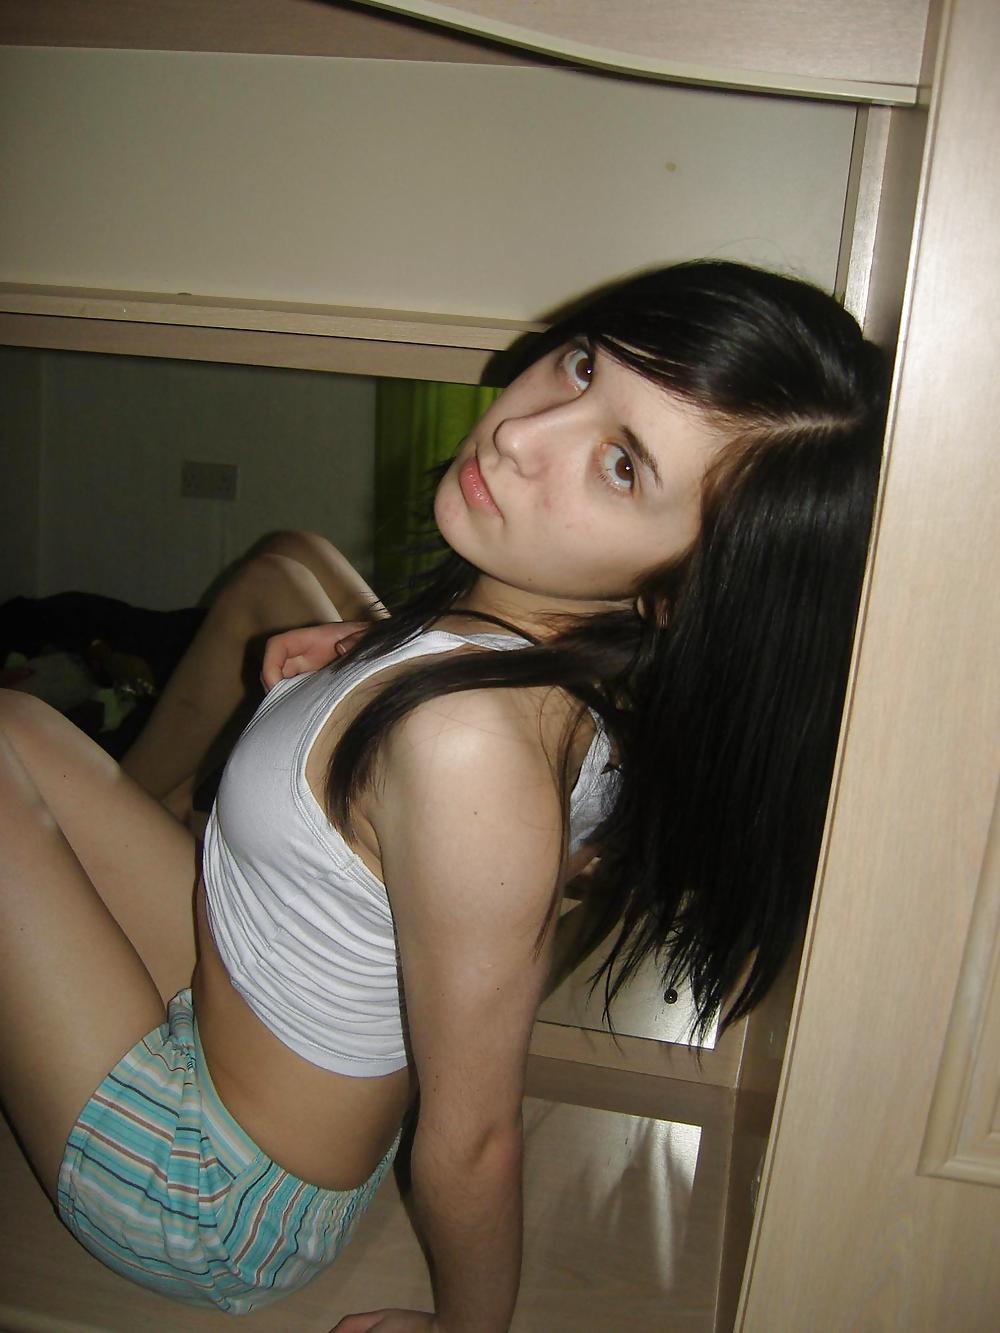 Very sexy young British Amateur girl 002